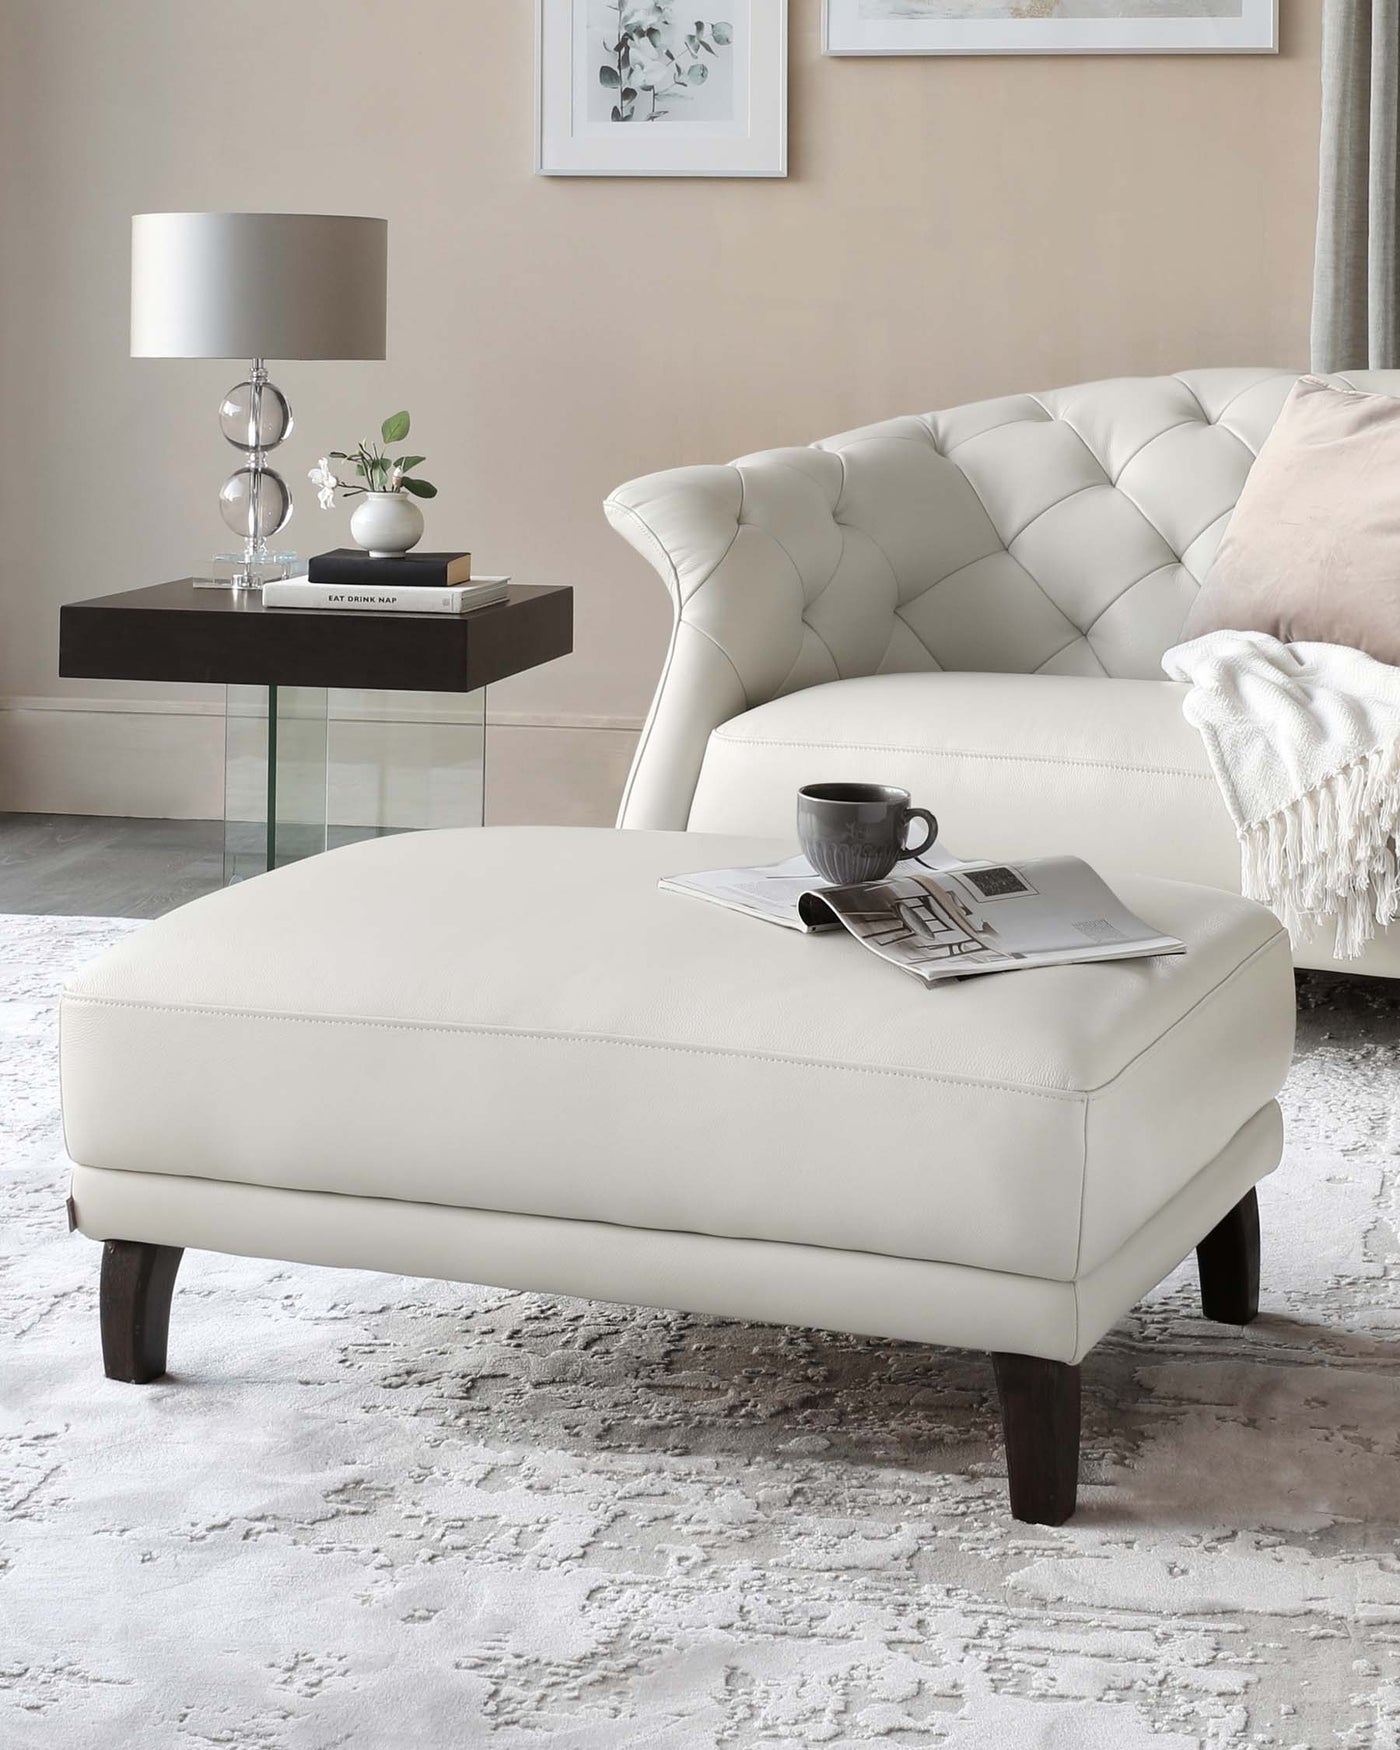 Elegant living room setup featuring a tufted cream-colored sofa with a high back and rolled arms, a matching rectangular ottoman with a smooth surface and wooden legs, and a modern side table with a black glossy finish and glass top, accentuated by a contemporary silver table lamp, decorative vase, and assorted books.